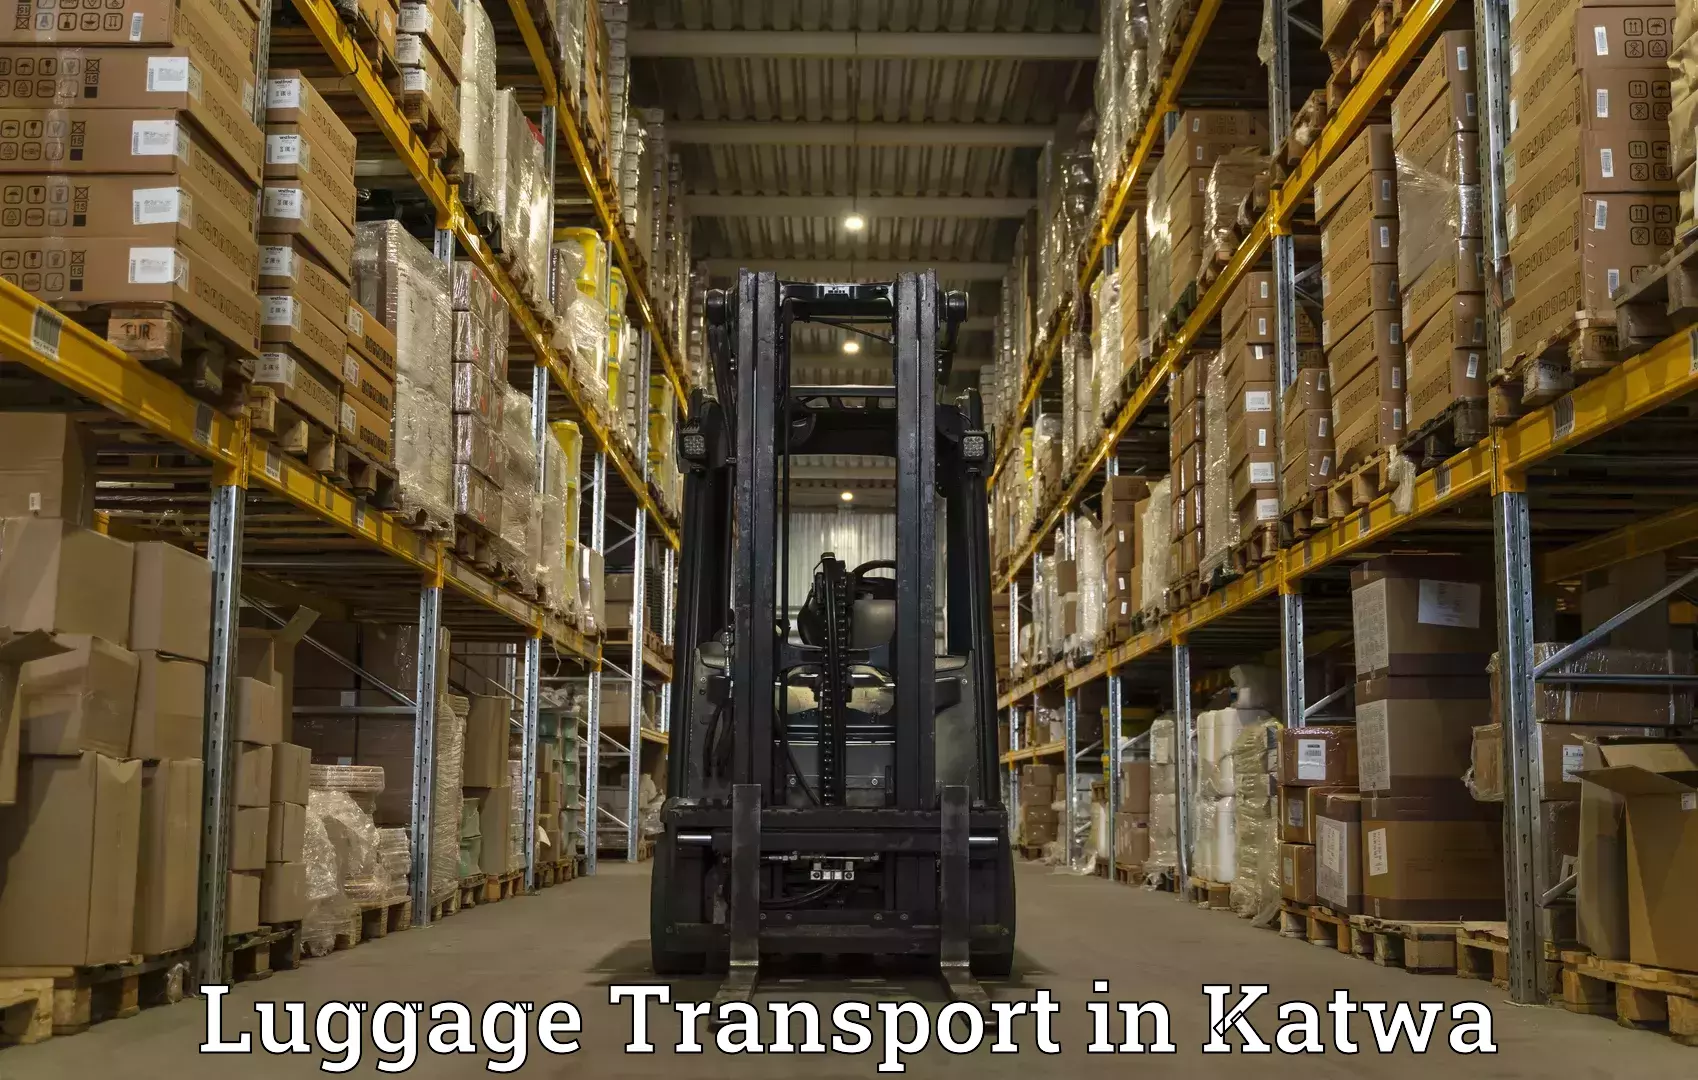 Long distance luggage transport in Katwa